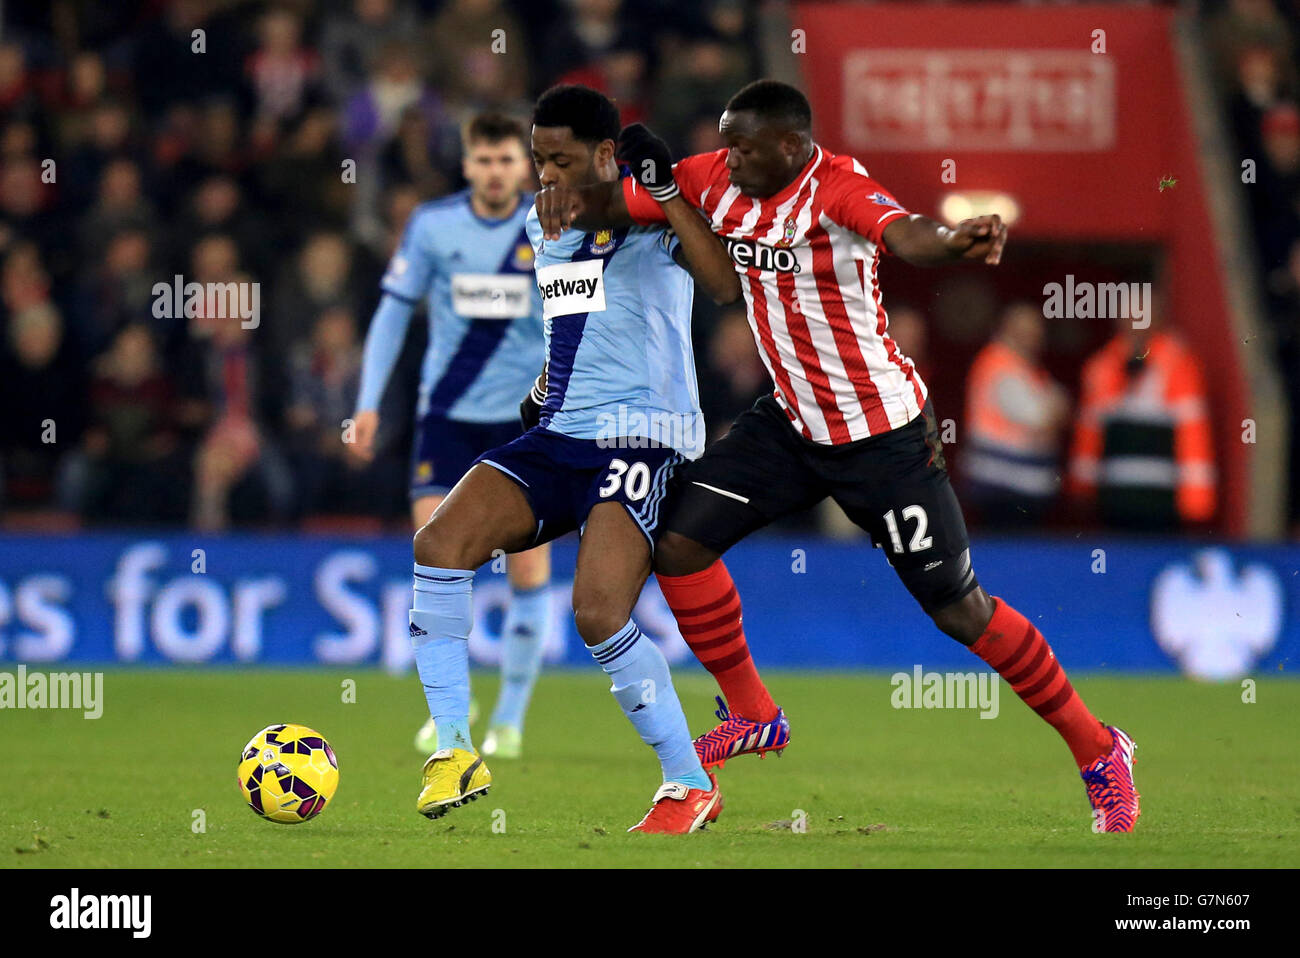 West Ham United's Alex Song (left) battles for the ball with Southampton's Victor Wanyama (right) during the Barclays Premier League match at St Mary's, Southampton. Stock Photo